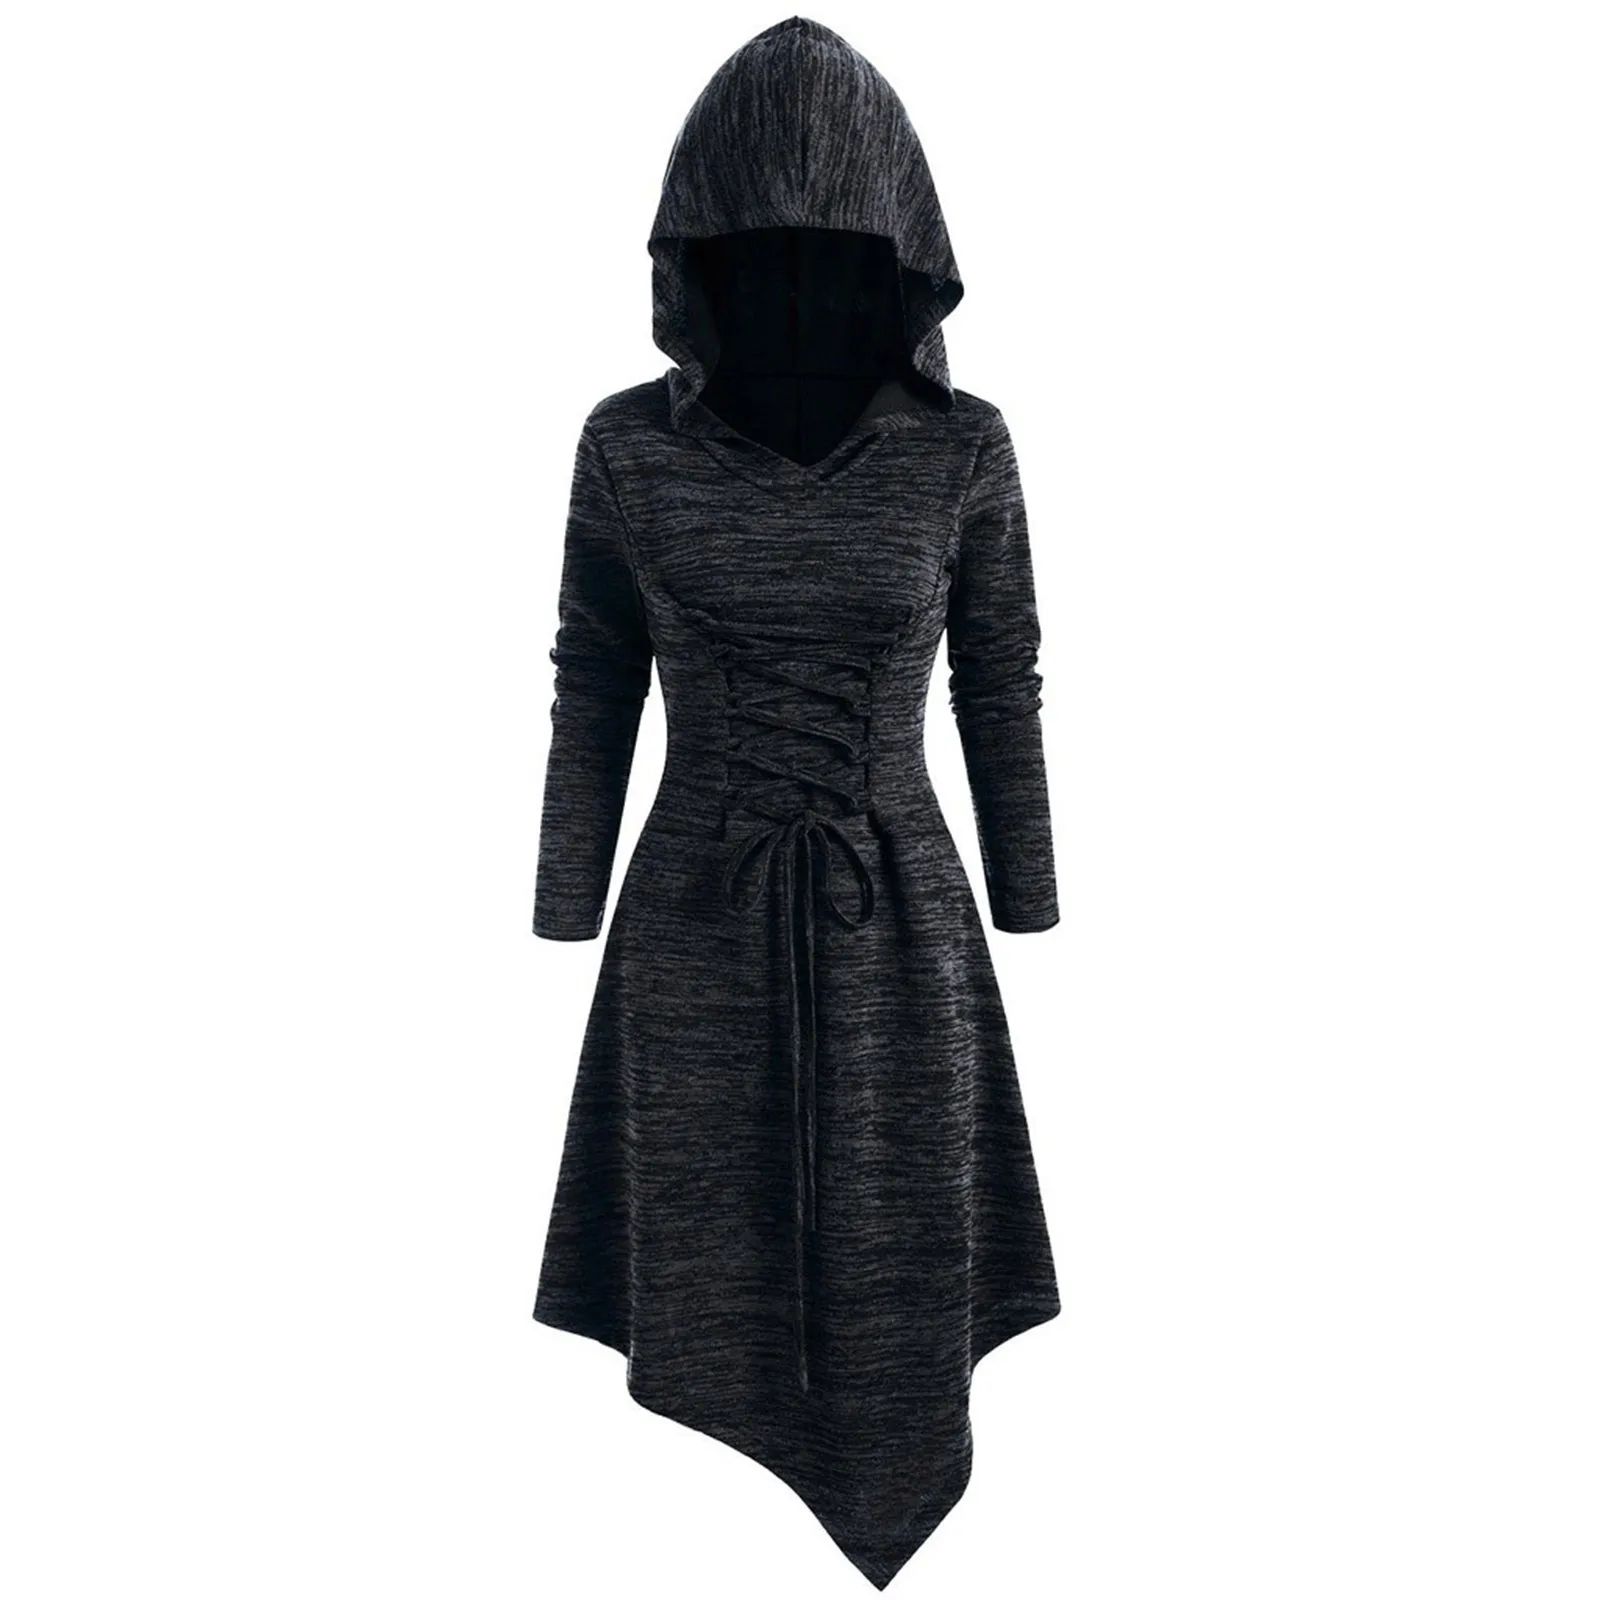 

Autumn Women Casual Loose Daily Lace Up Heathered Asymmetric Hooded Dress Top Fashion Comfortable Blouse платье женское